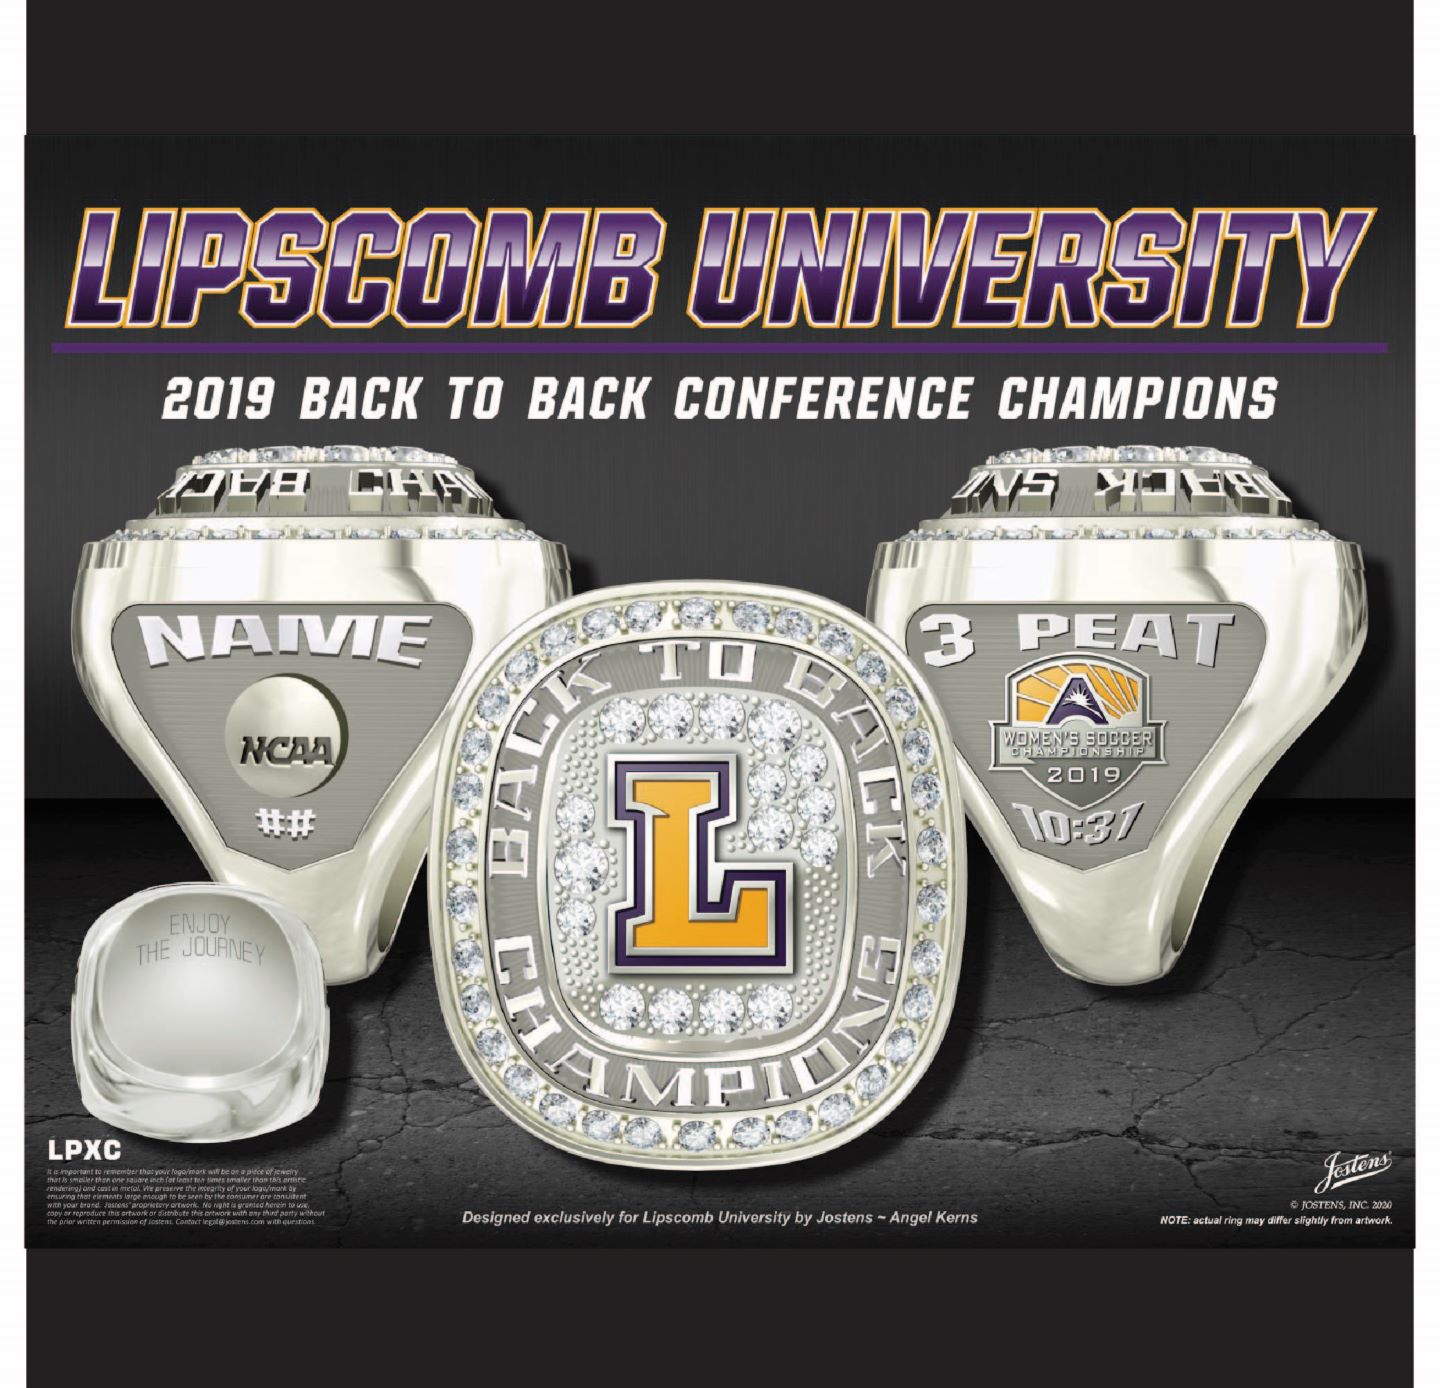 Lipscomb University Women's Soccer 2019 Conference Championship Ring